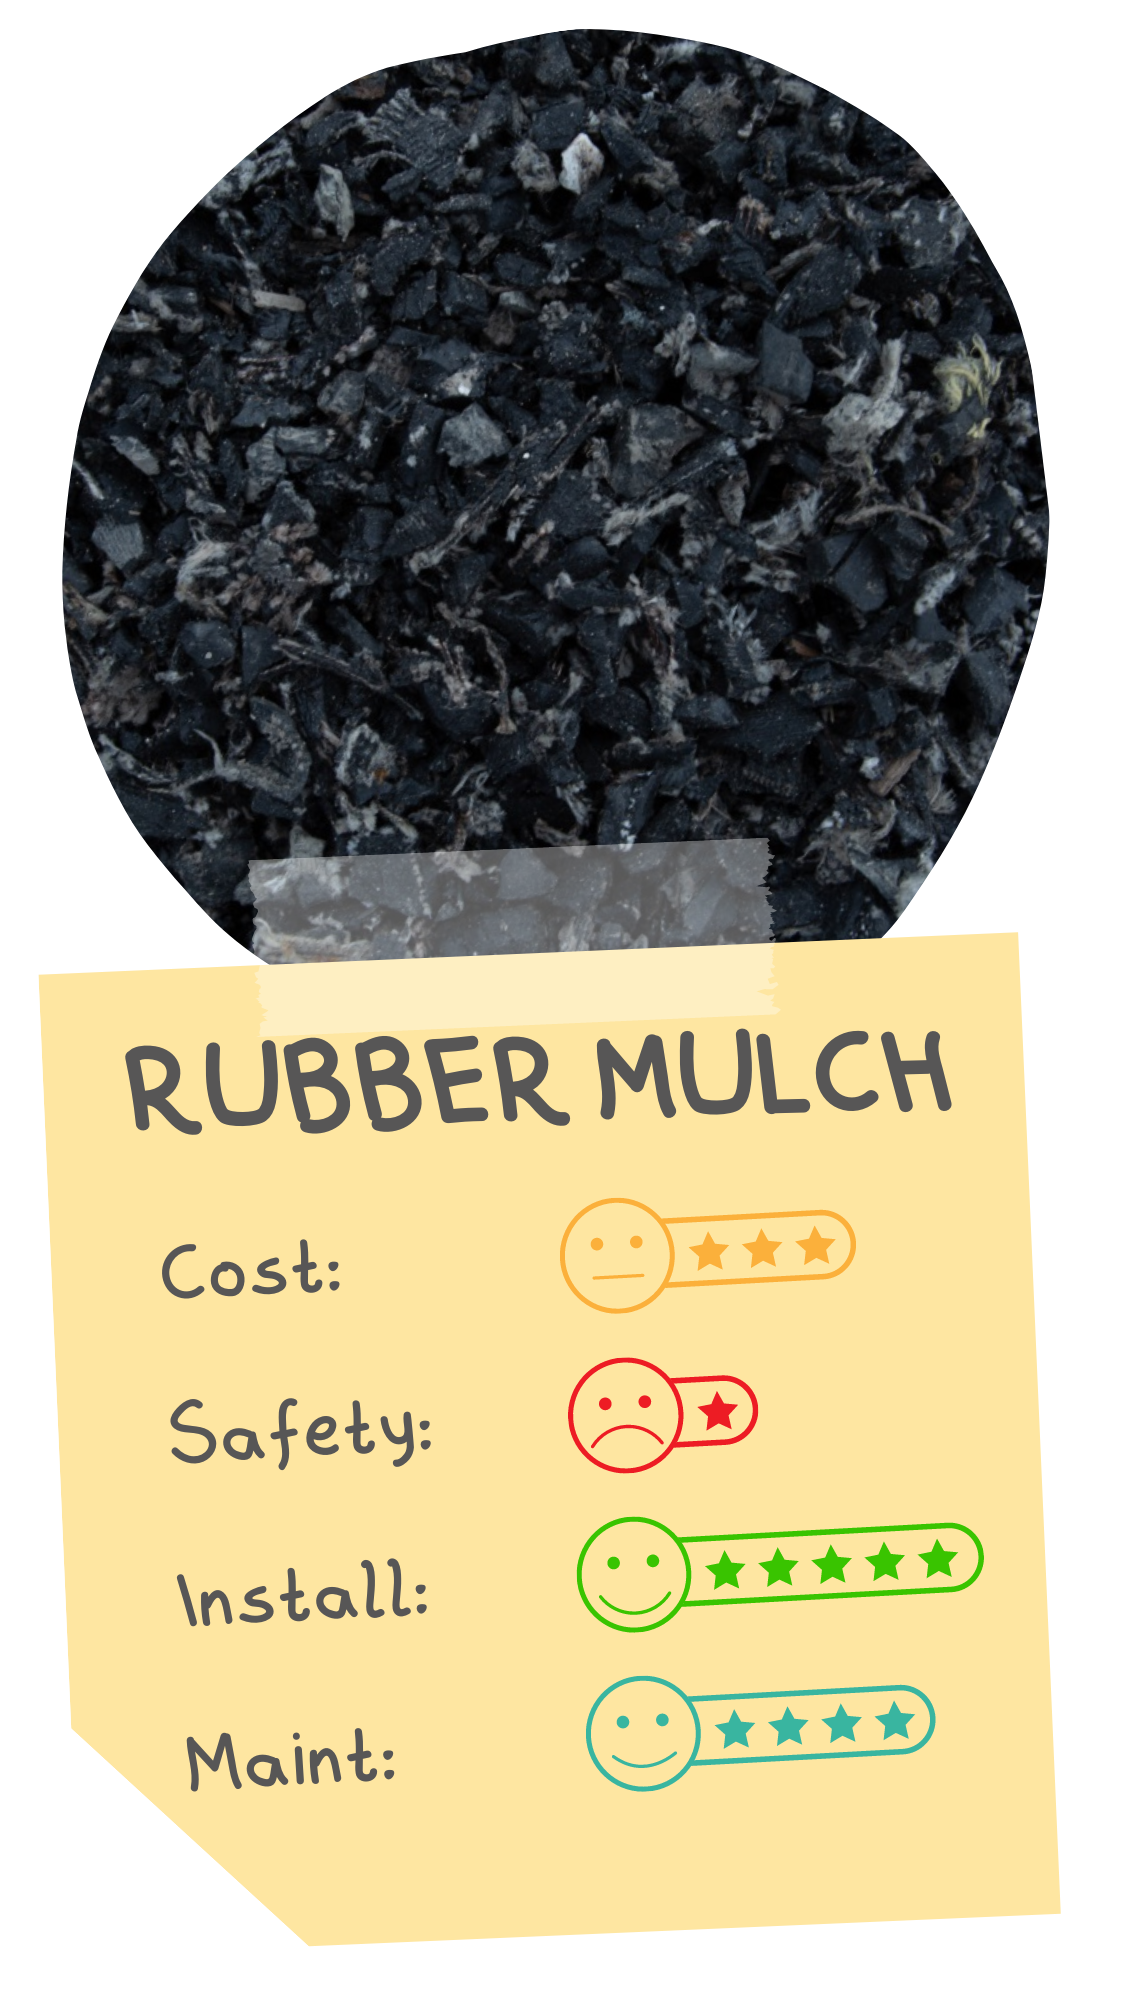 Rubber mulch is rated by four categories. It receives 3 stars for cost, 1 star for safety, 5 stars for installation, and 4 stars for maintenance.